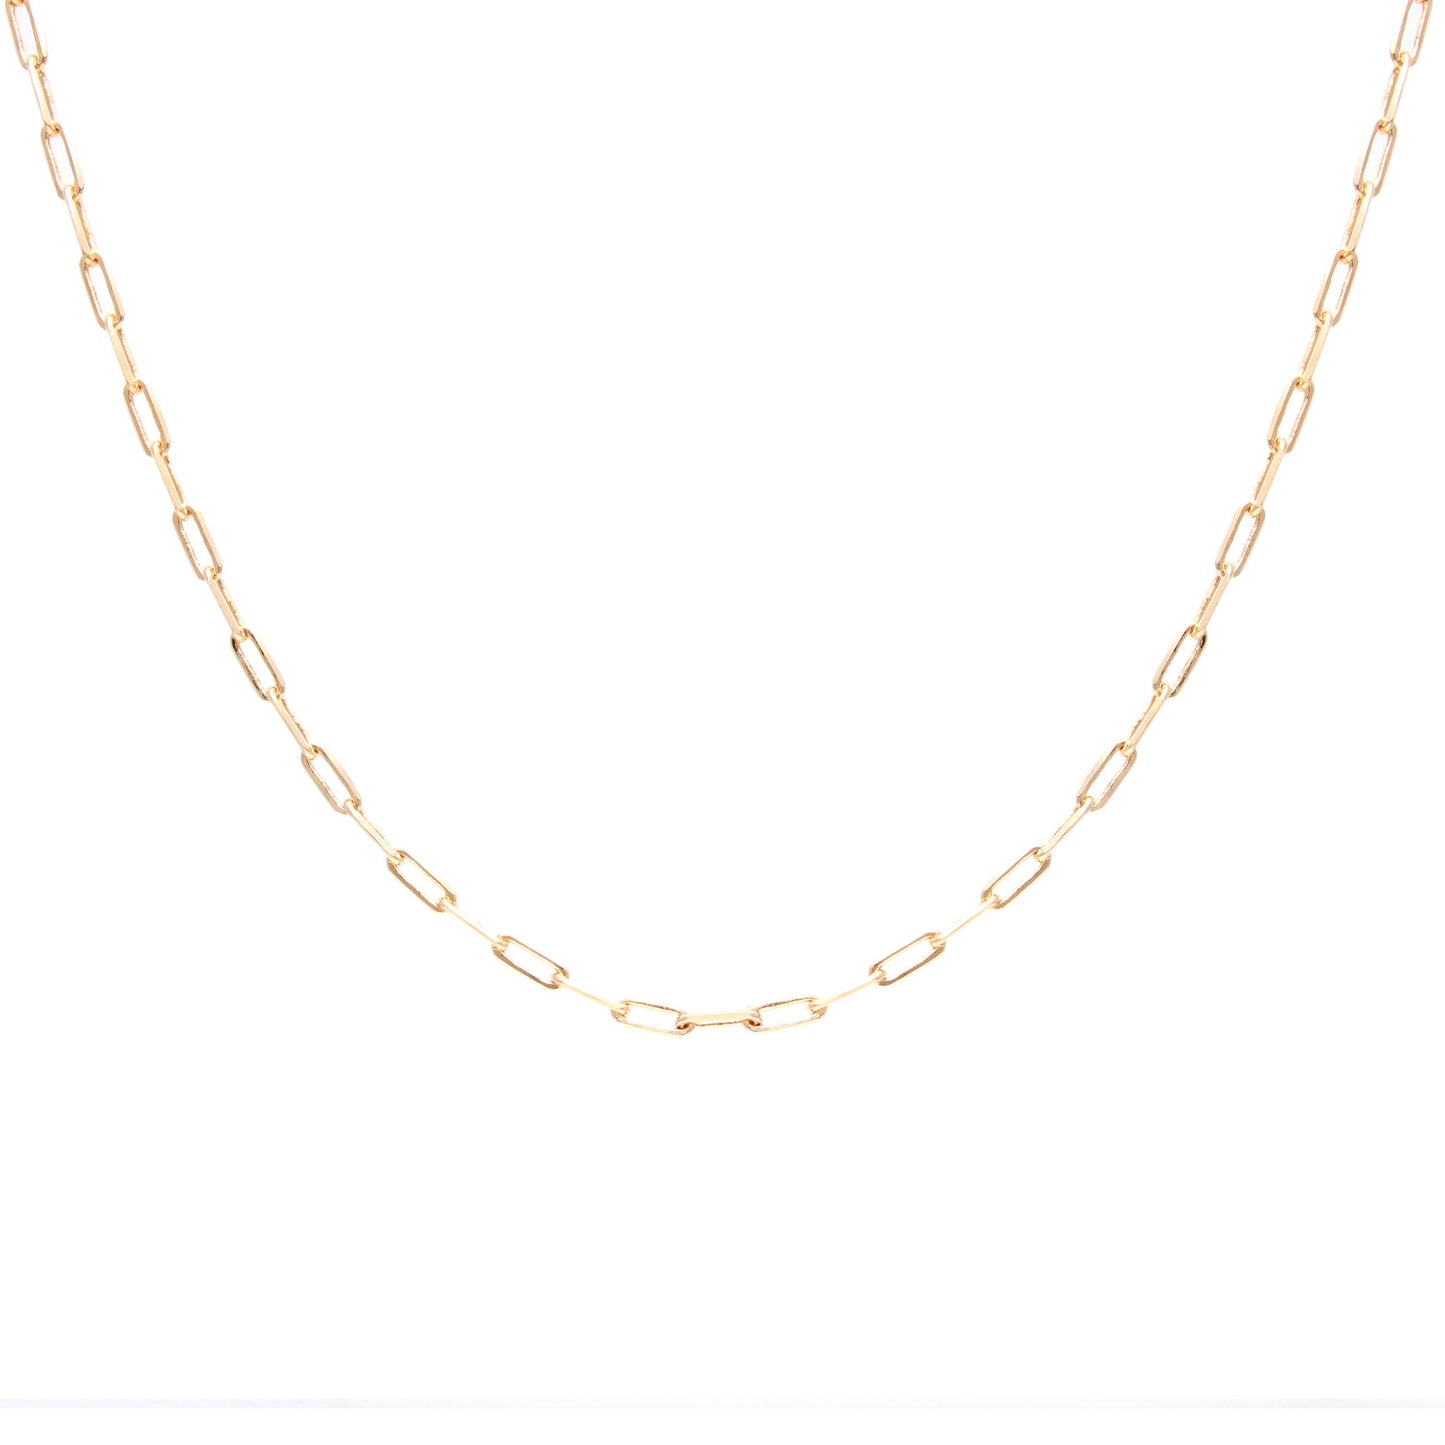 18K gold plated chain necklace with small rectangular links